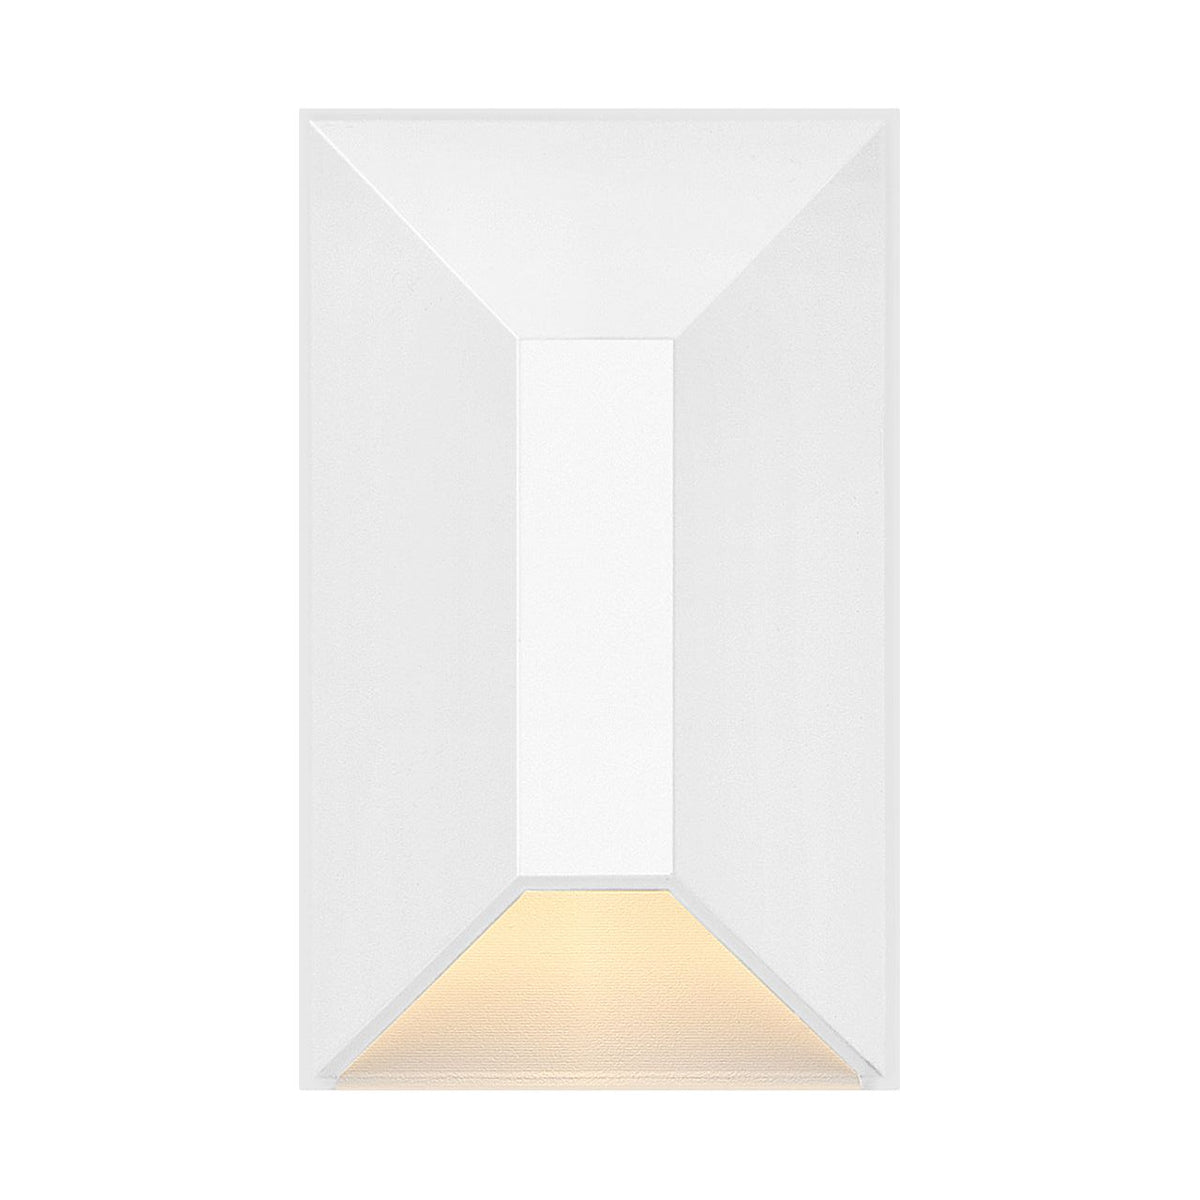 Hinkley Canada - 15223MW - LED Wall Sconce - Nuvi Deck Sconce - Matte White